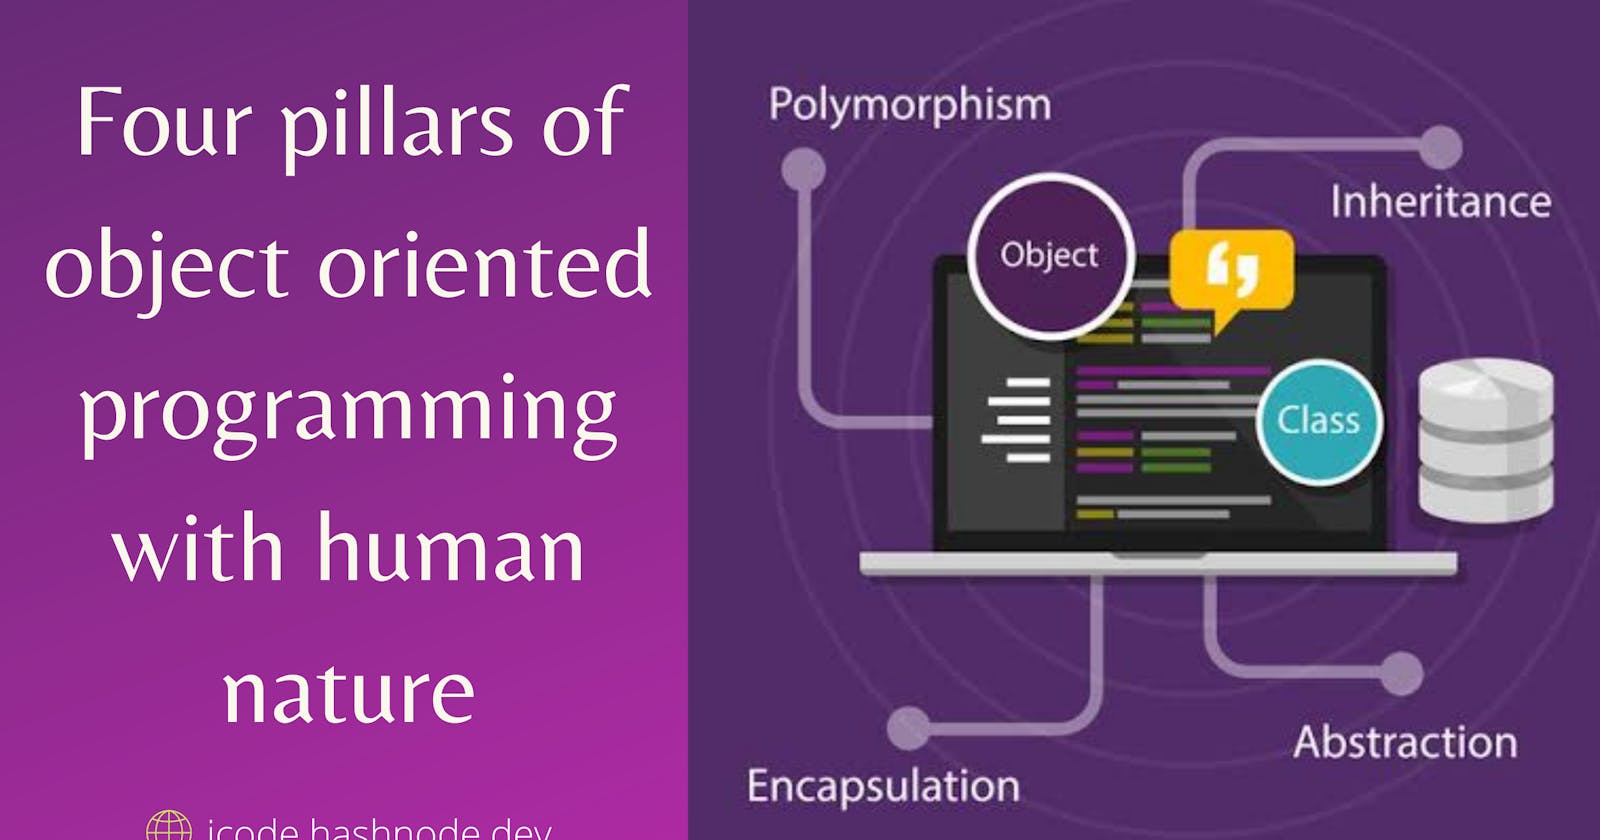 Learn the four pillars of Object oriented programming, with human nature